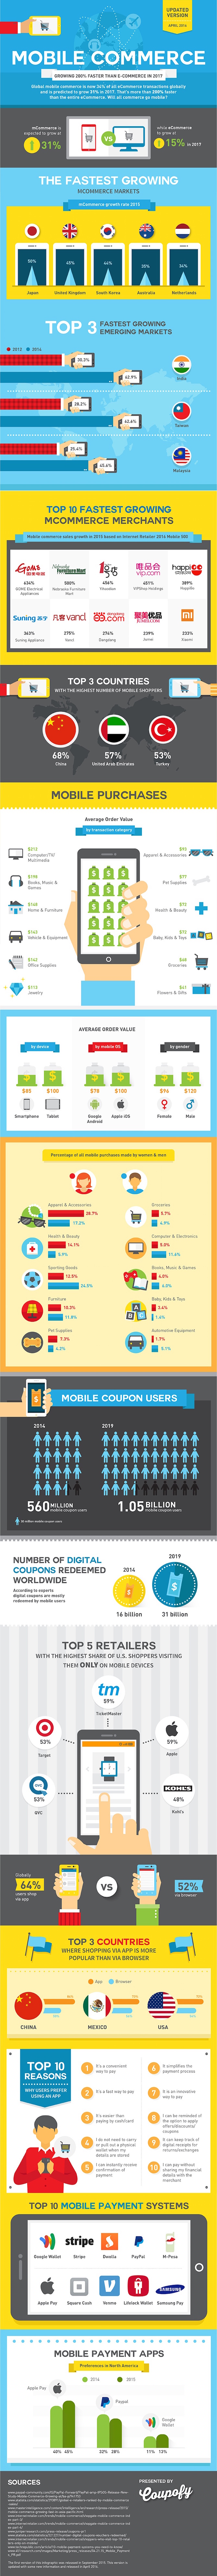 mobile-commerce-infographic